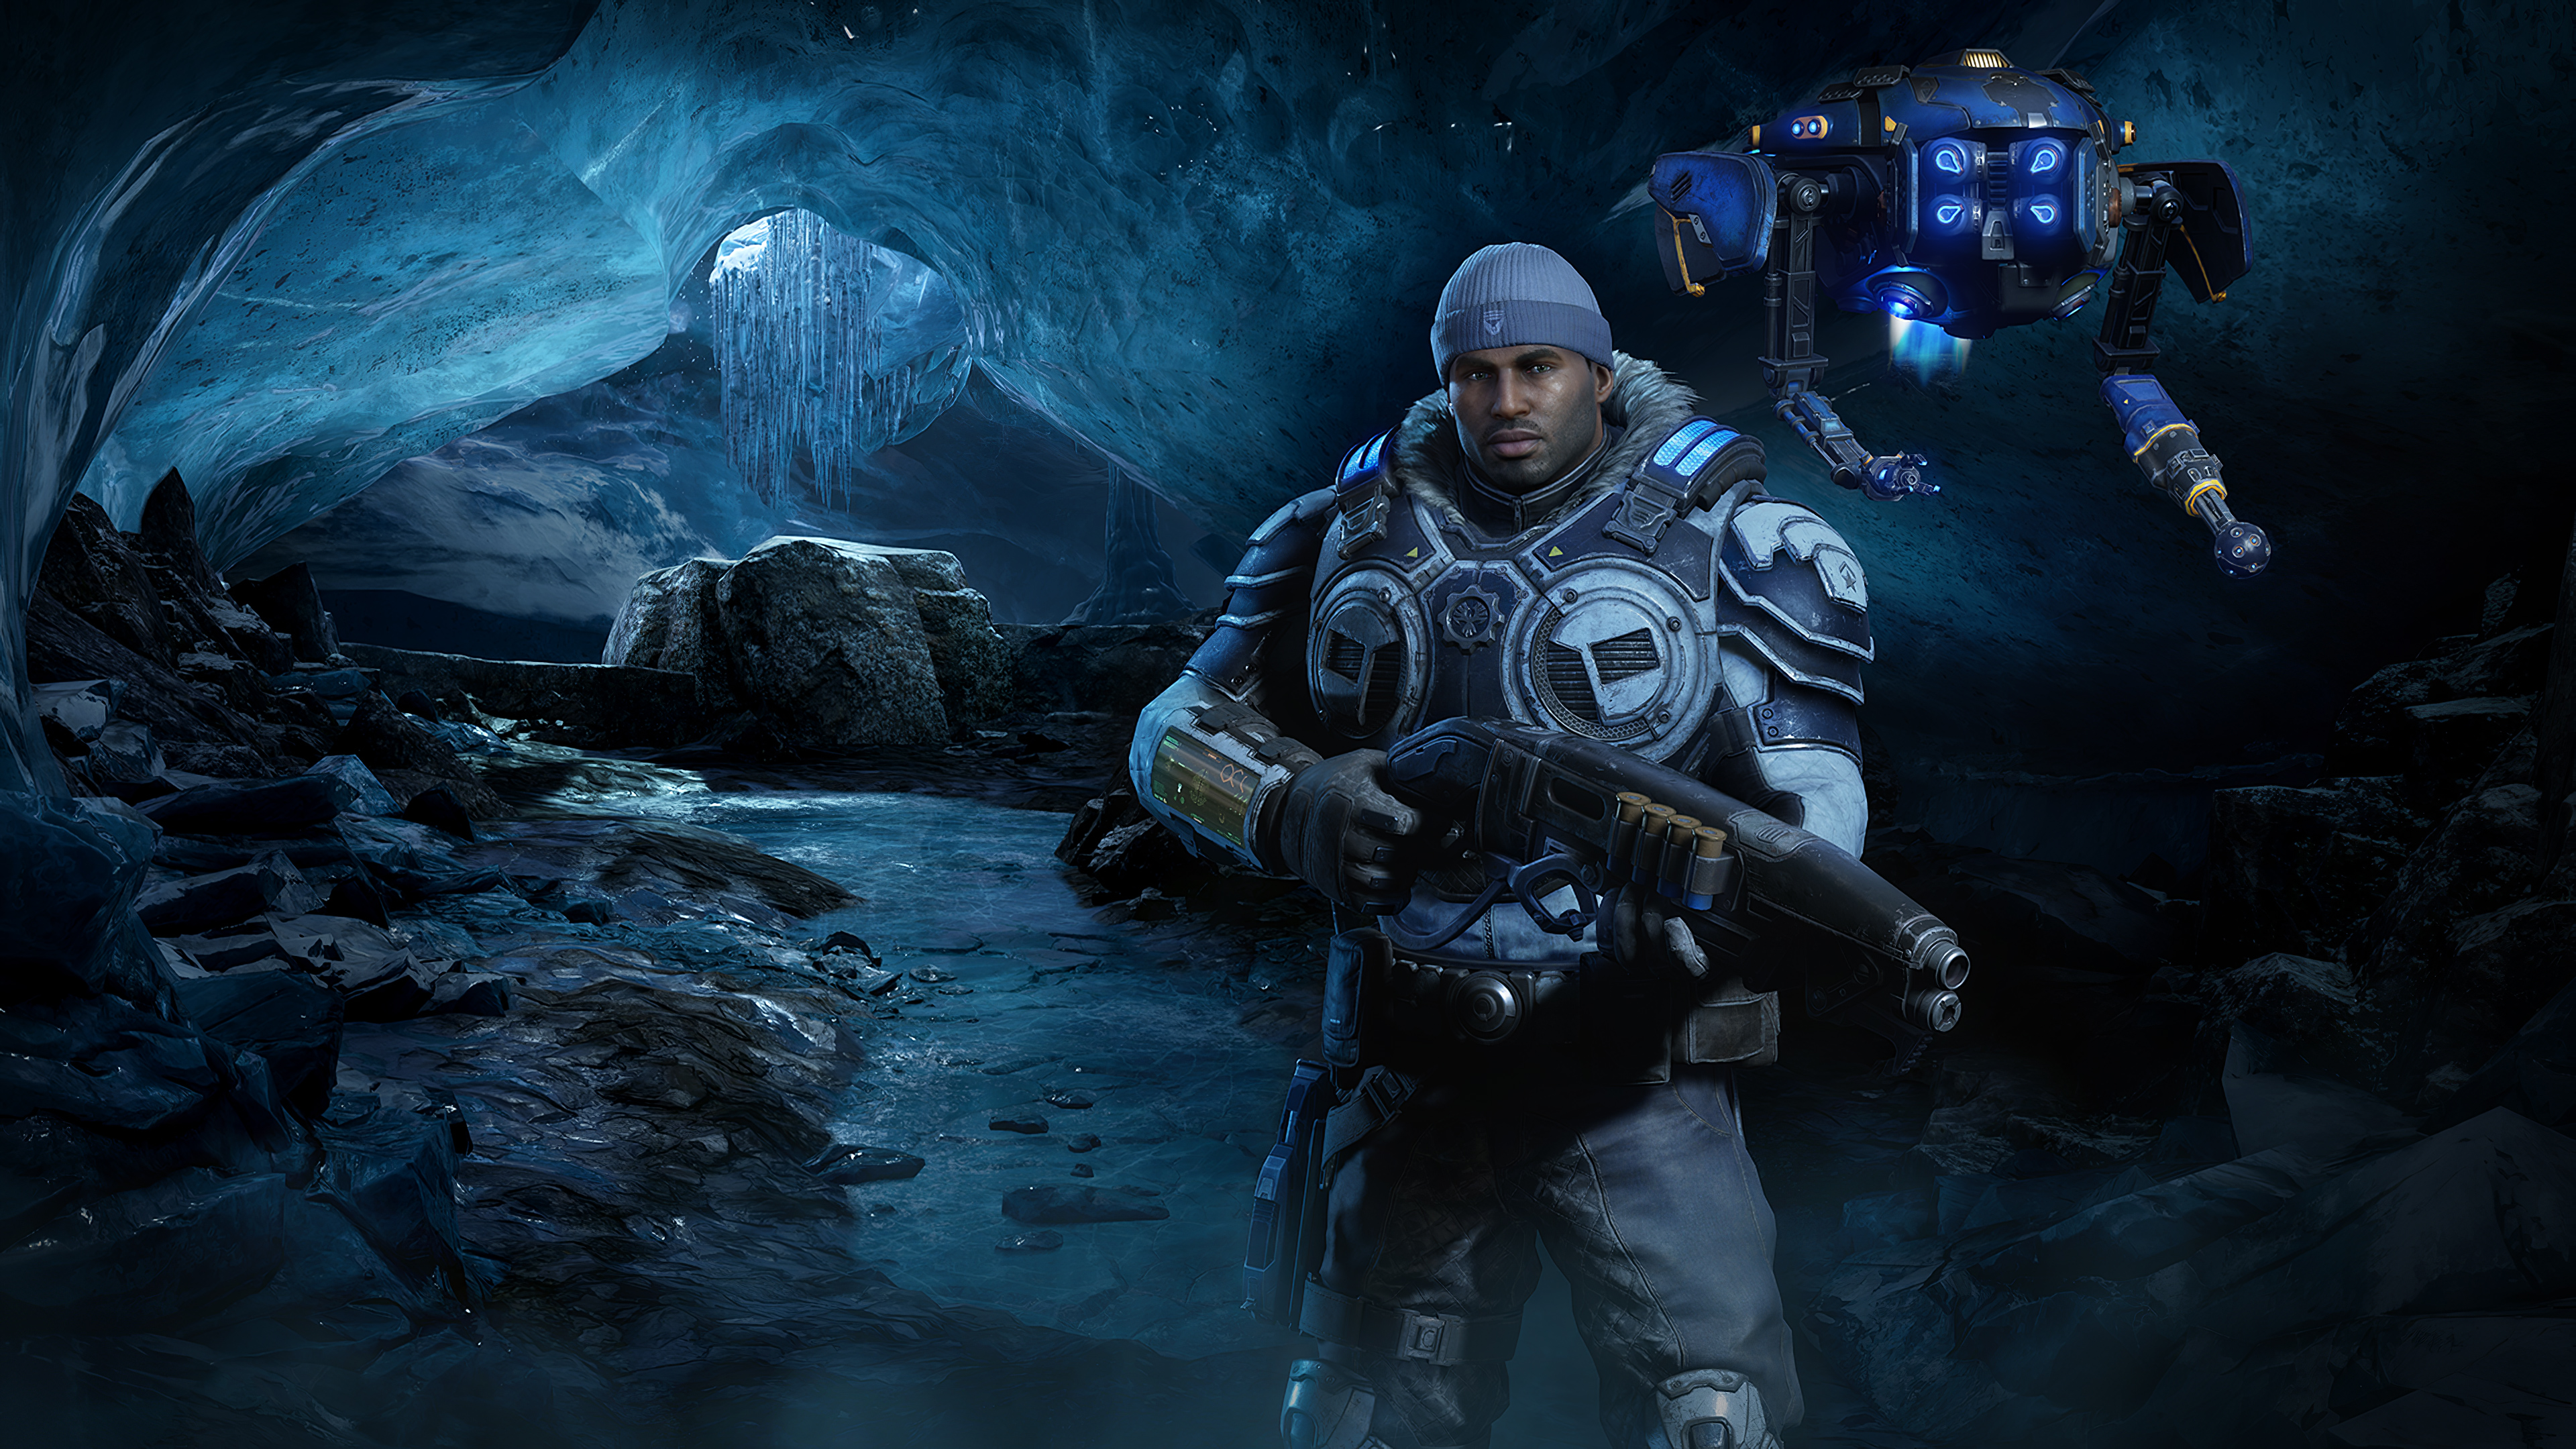 Free photo The soldier with the machine gun from Gears 5.